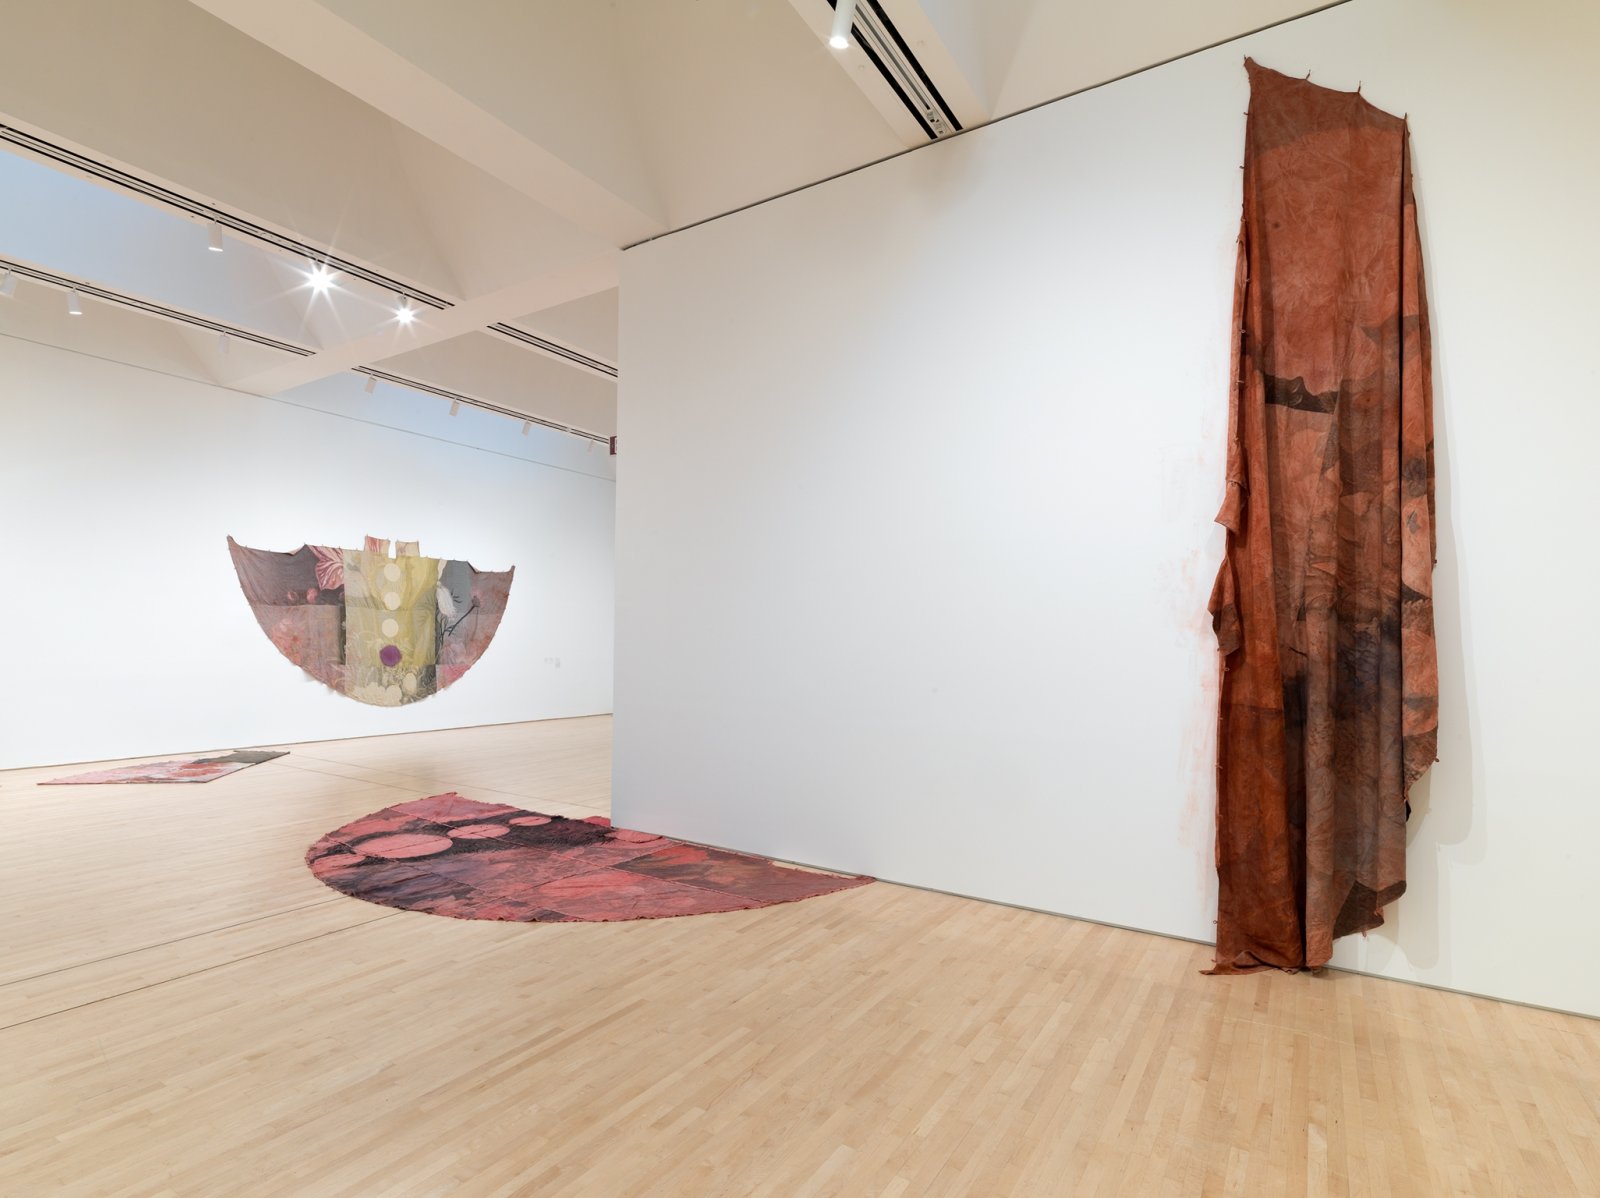 Duane Linklater, can the circle be unbroken 1–5, 2019, digital print on linen, dye, charcoal, mixed media, installation dimensions variable. Installation view, SOFT POWER, SF MOMA, San Francisco, USA, 2019